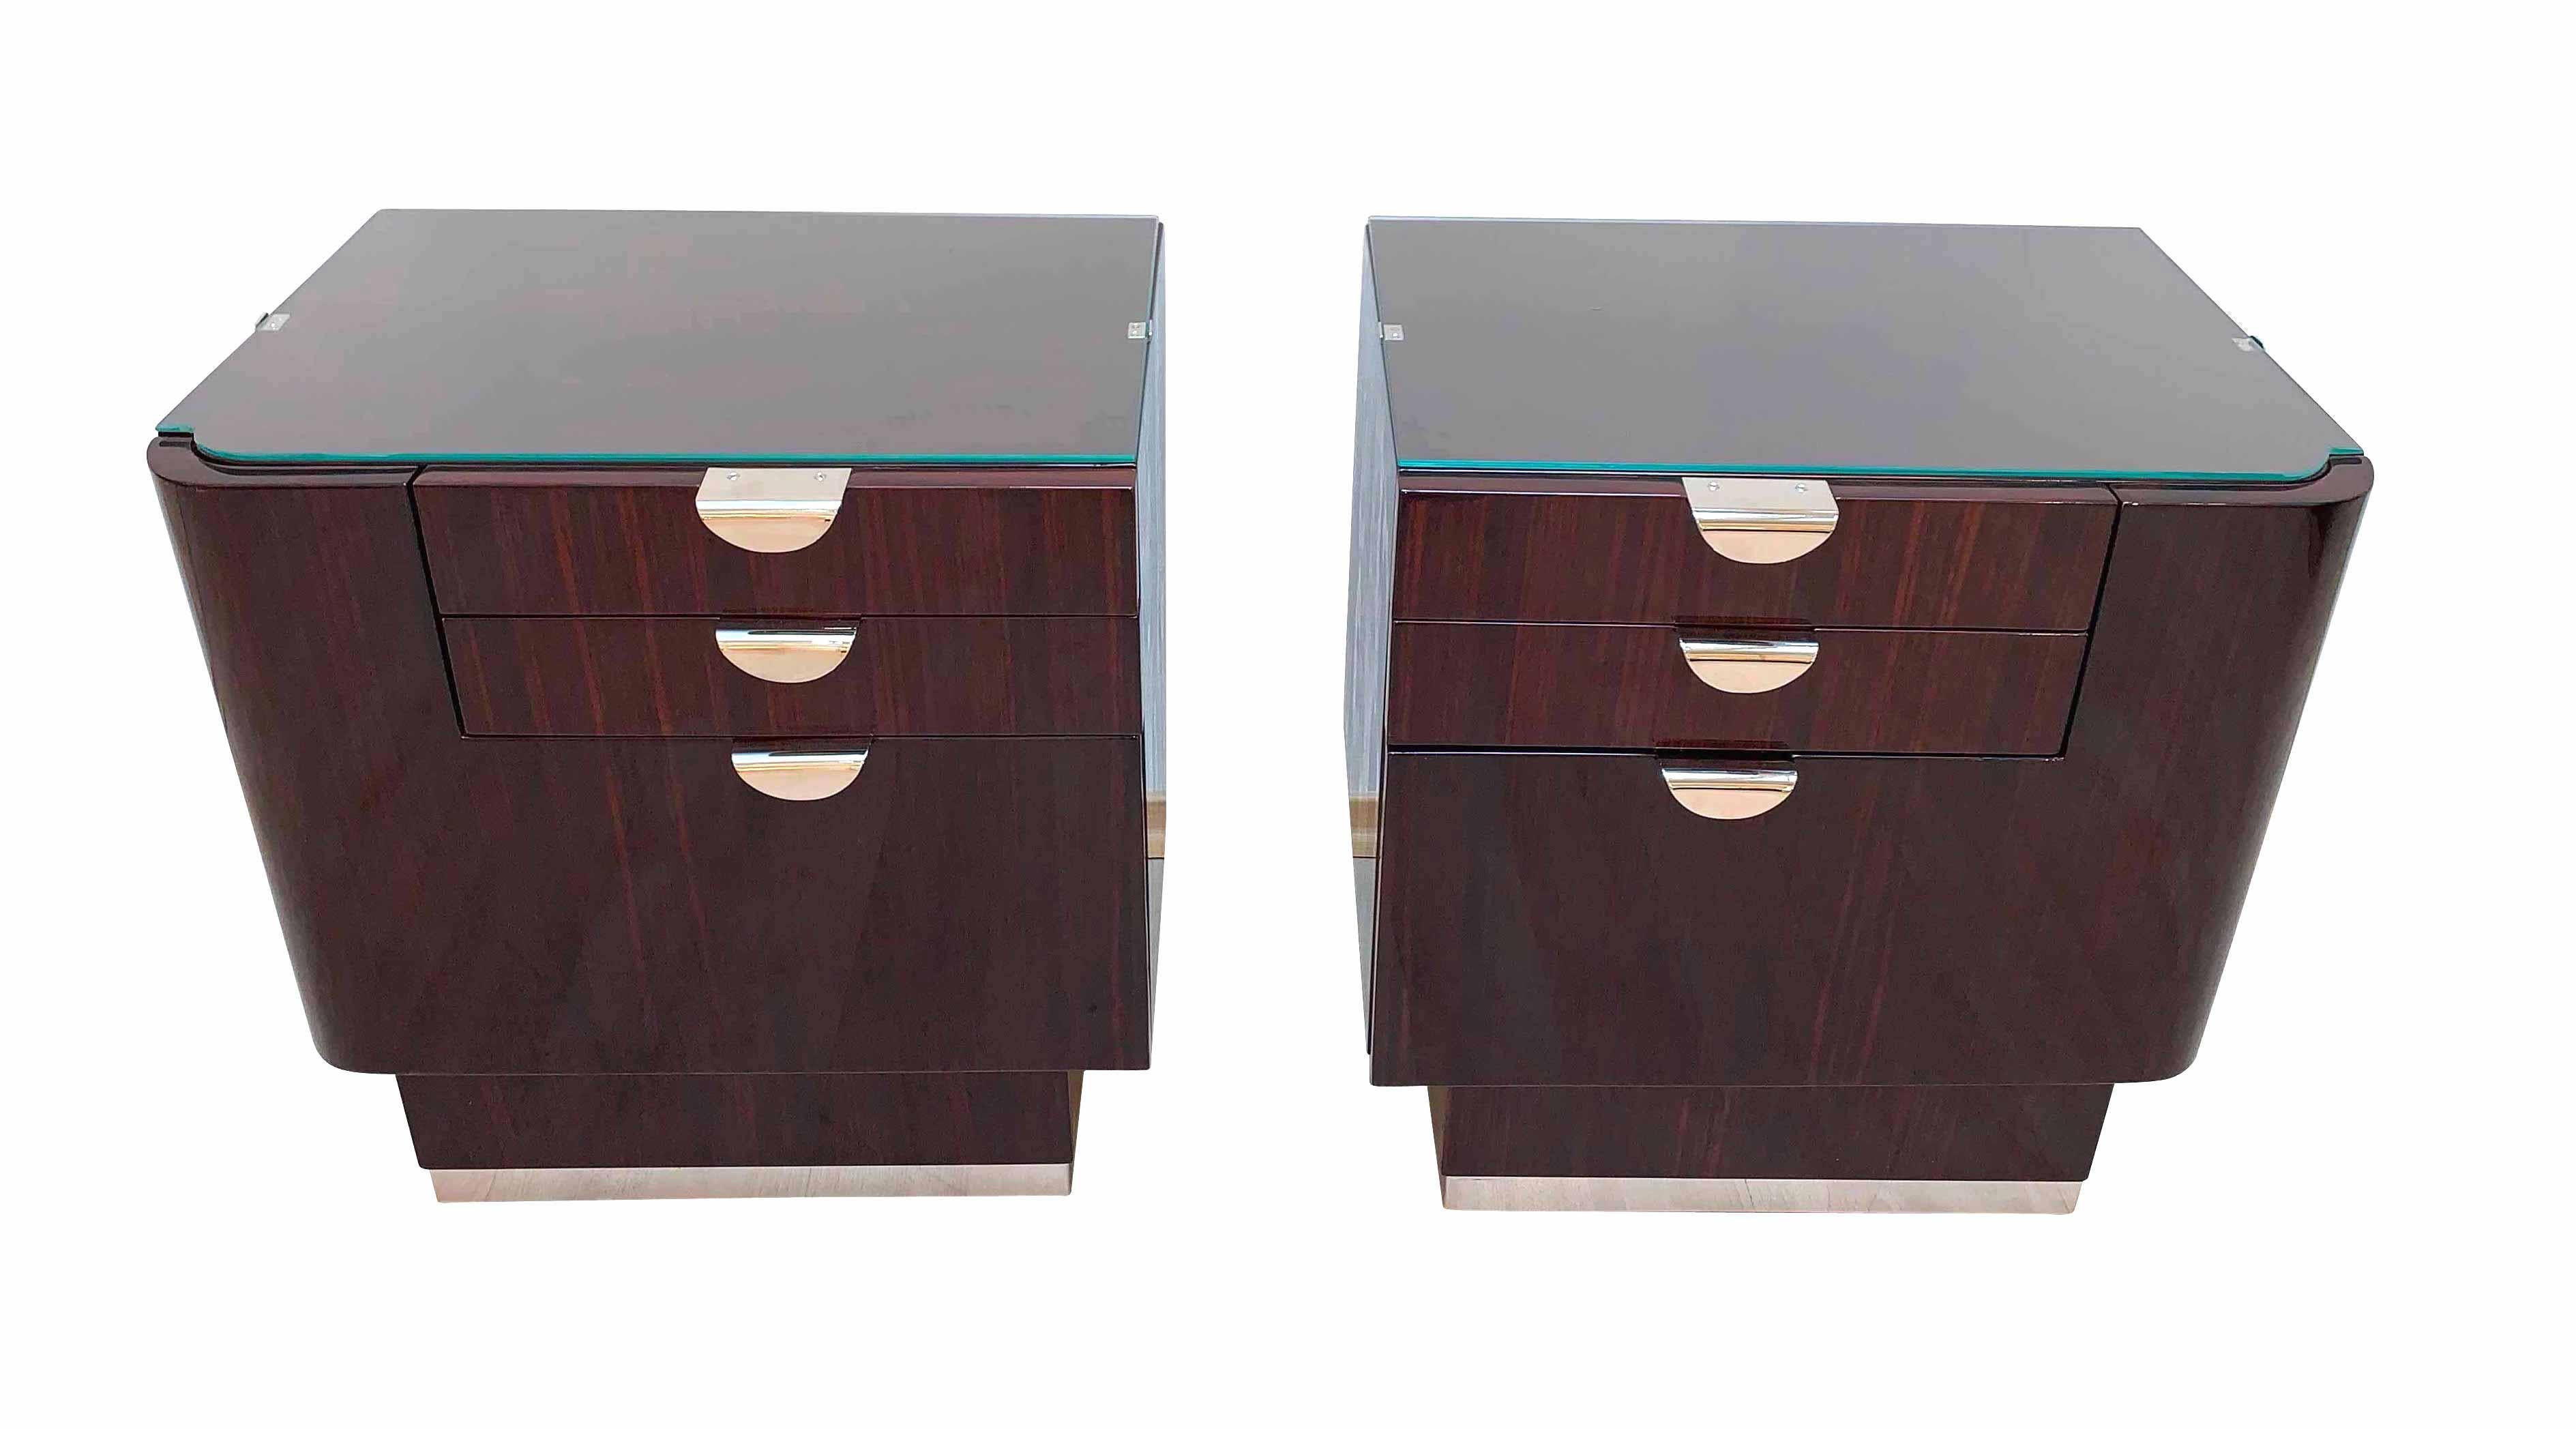 Beautiful pair of elegant, petite Bauhaus nightstands / bedside tables from Germany, circa 1930.

1 doors, 2 drawers. Rosewood lacquered and polished, inside with bright maple (Lacquered on doors, too).
Original handles, newly galvanized (nickeled).